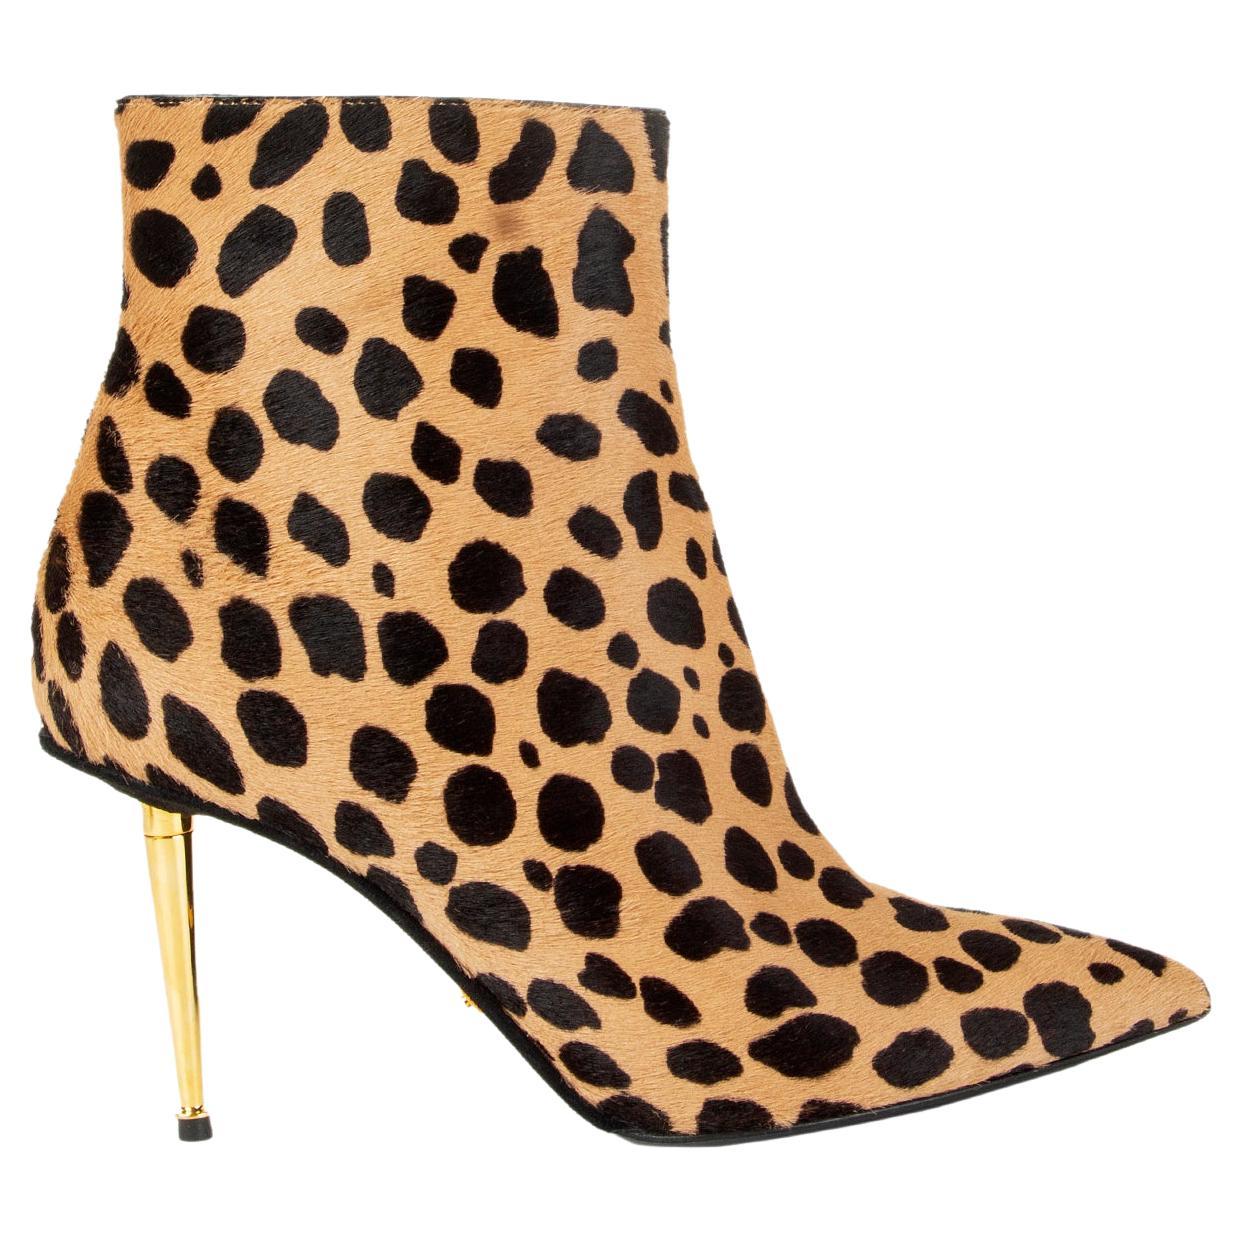 TOM FORD beige LEOPARD Calf Hair Ankle Boots Shoes 38